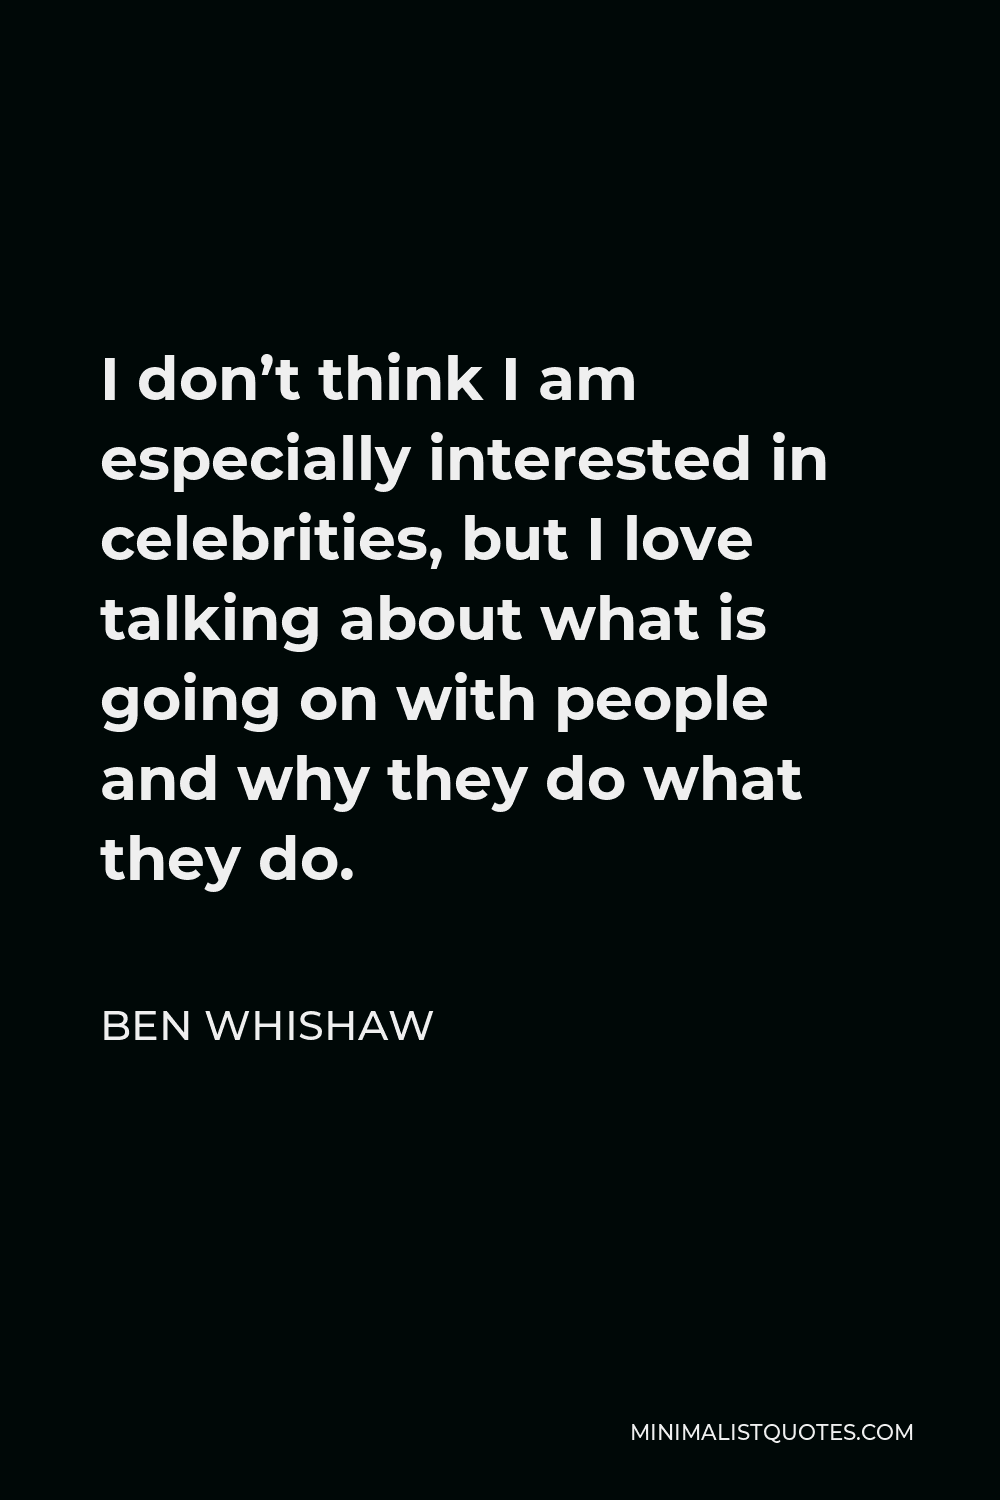 Ben Whishaw Quote - I don’t think I am especially interested in celebrities, but I love talking about what is going on with people and why they do what they do.